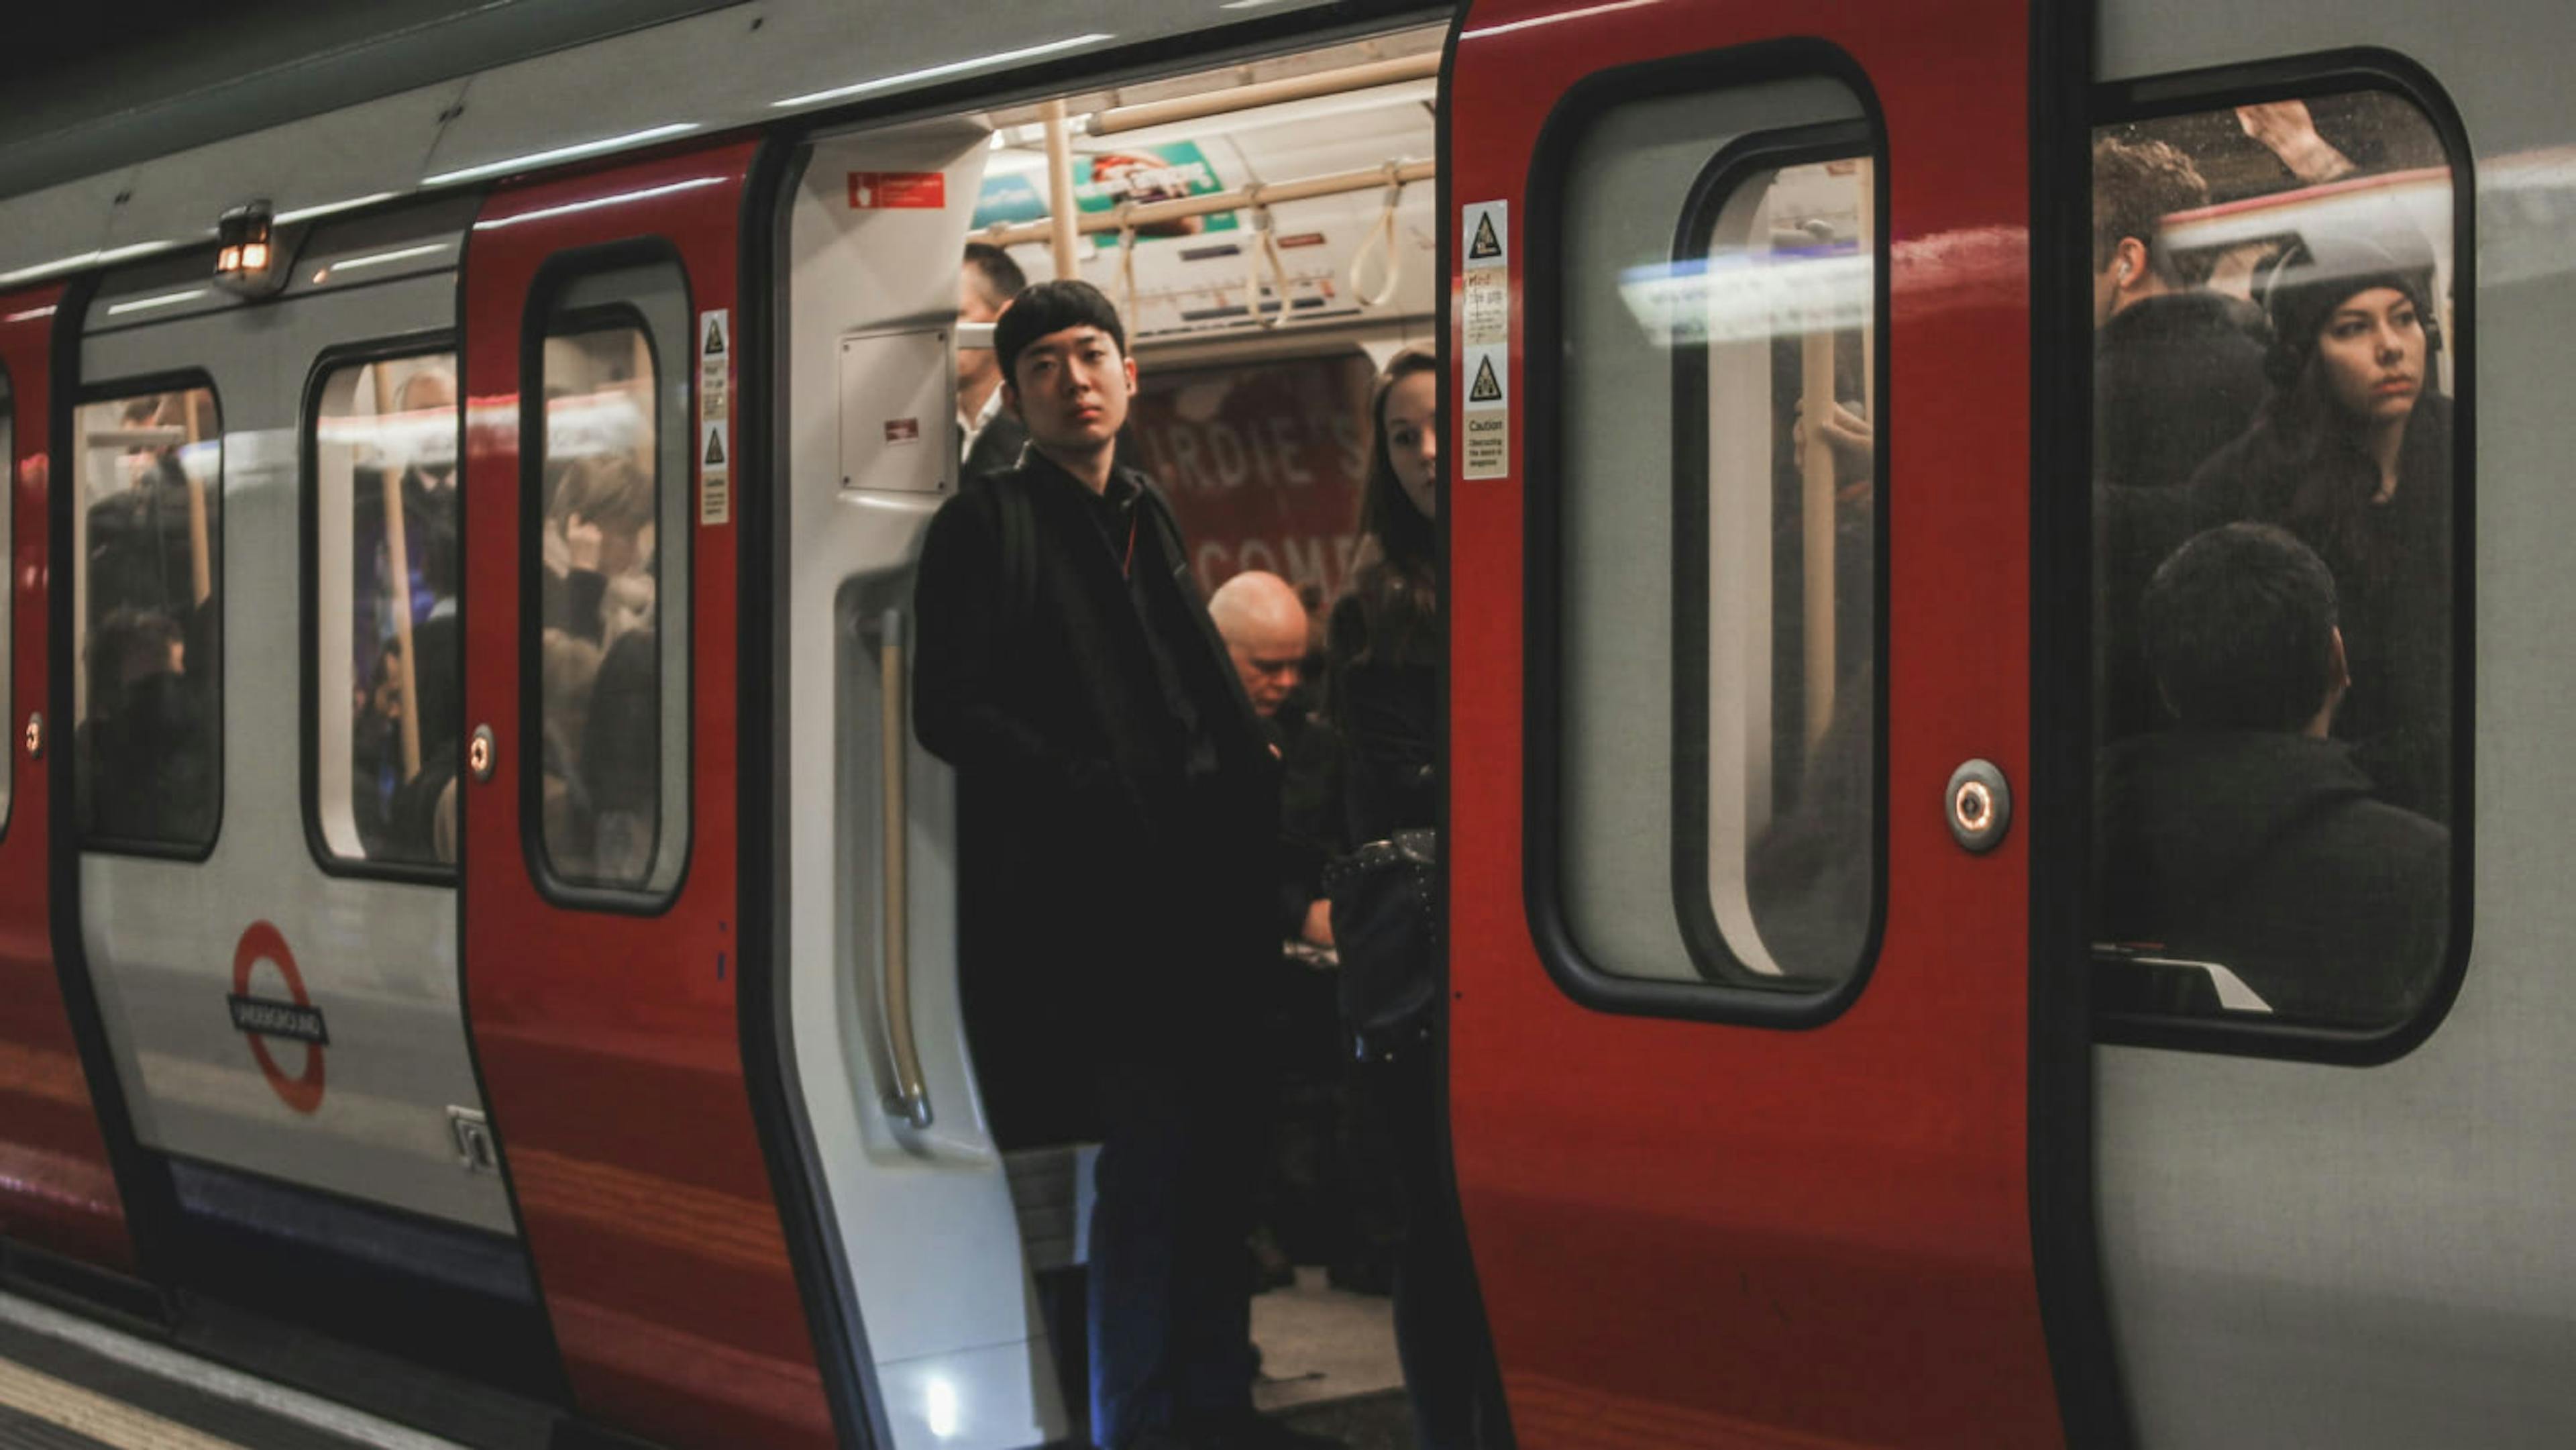 A man riding the underground in London.